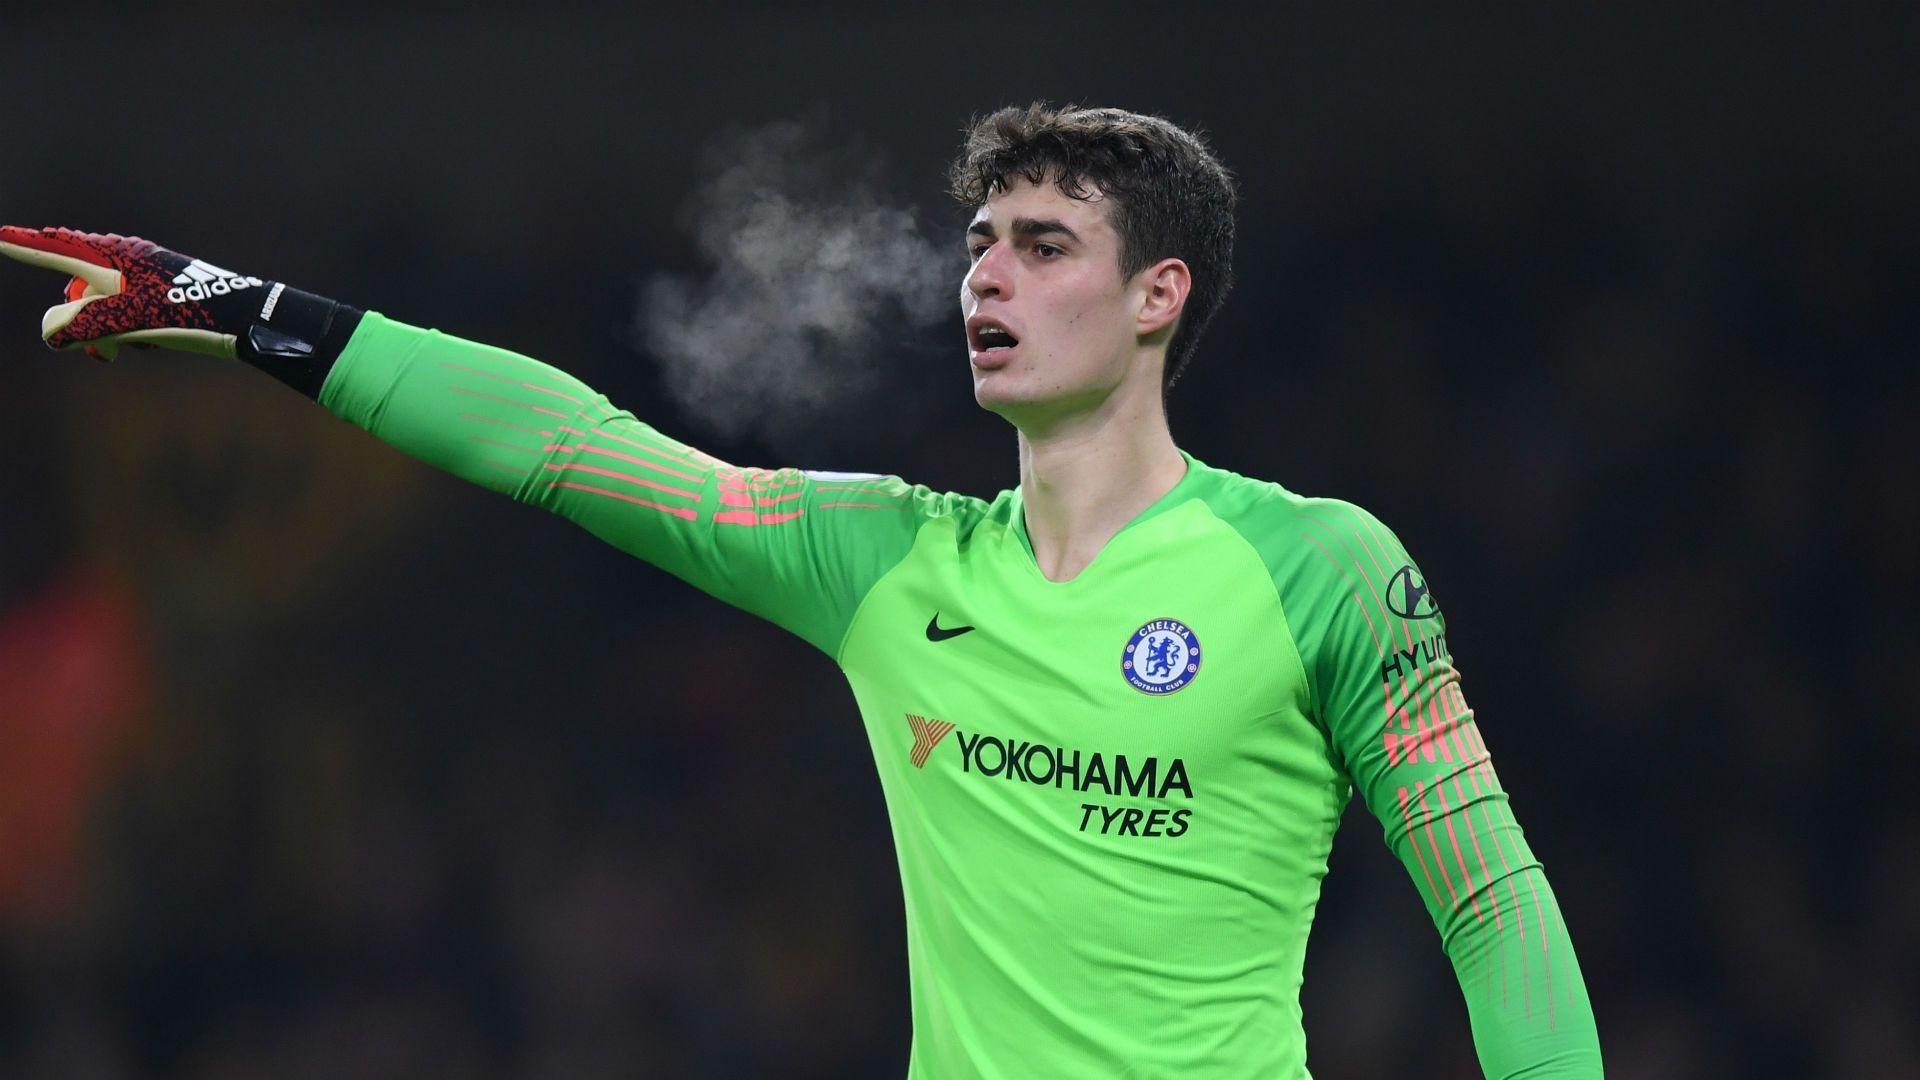 Kepa shining in 'completely different' Premier League, says Cudicini